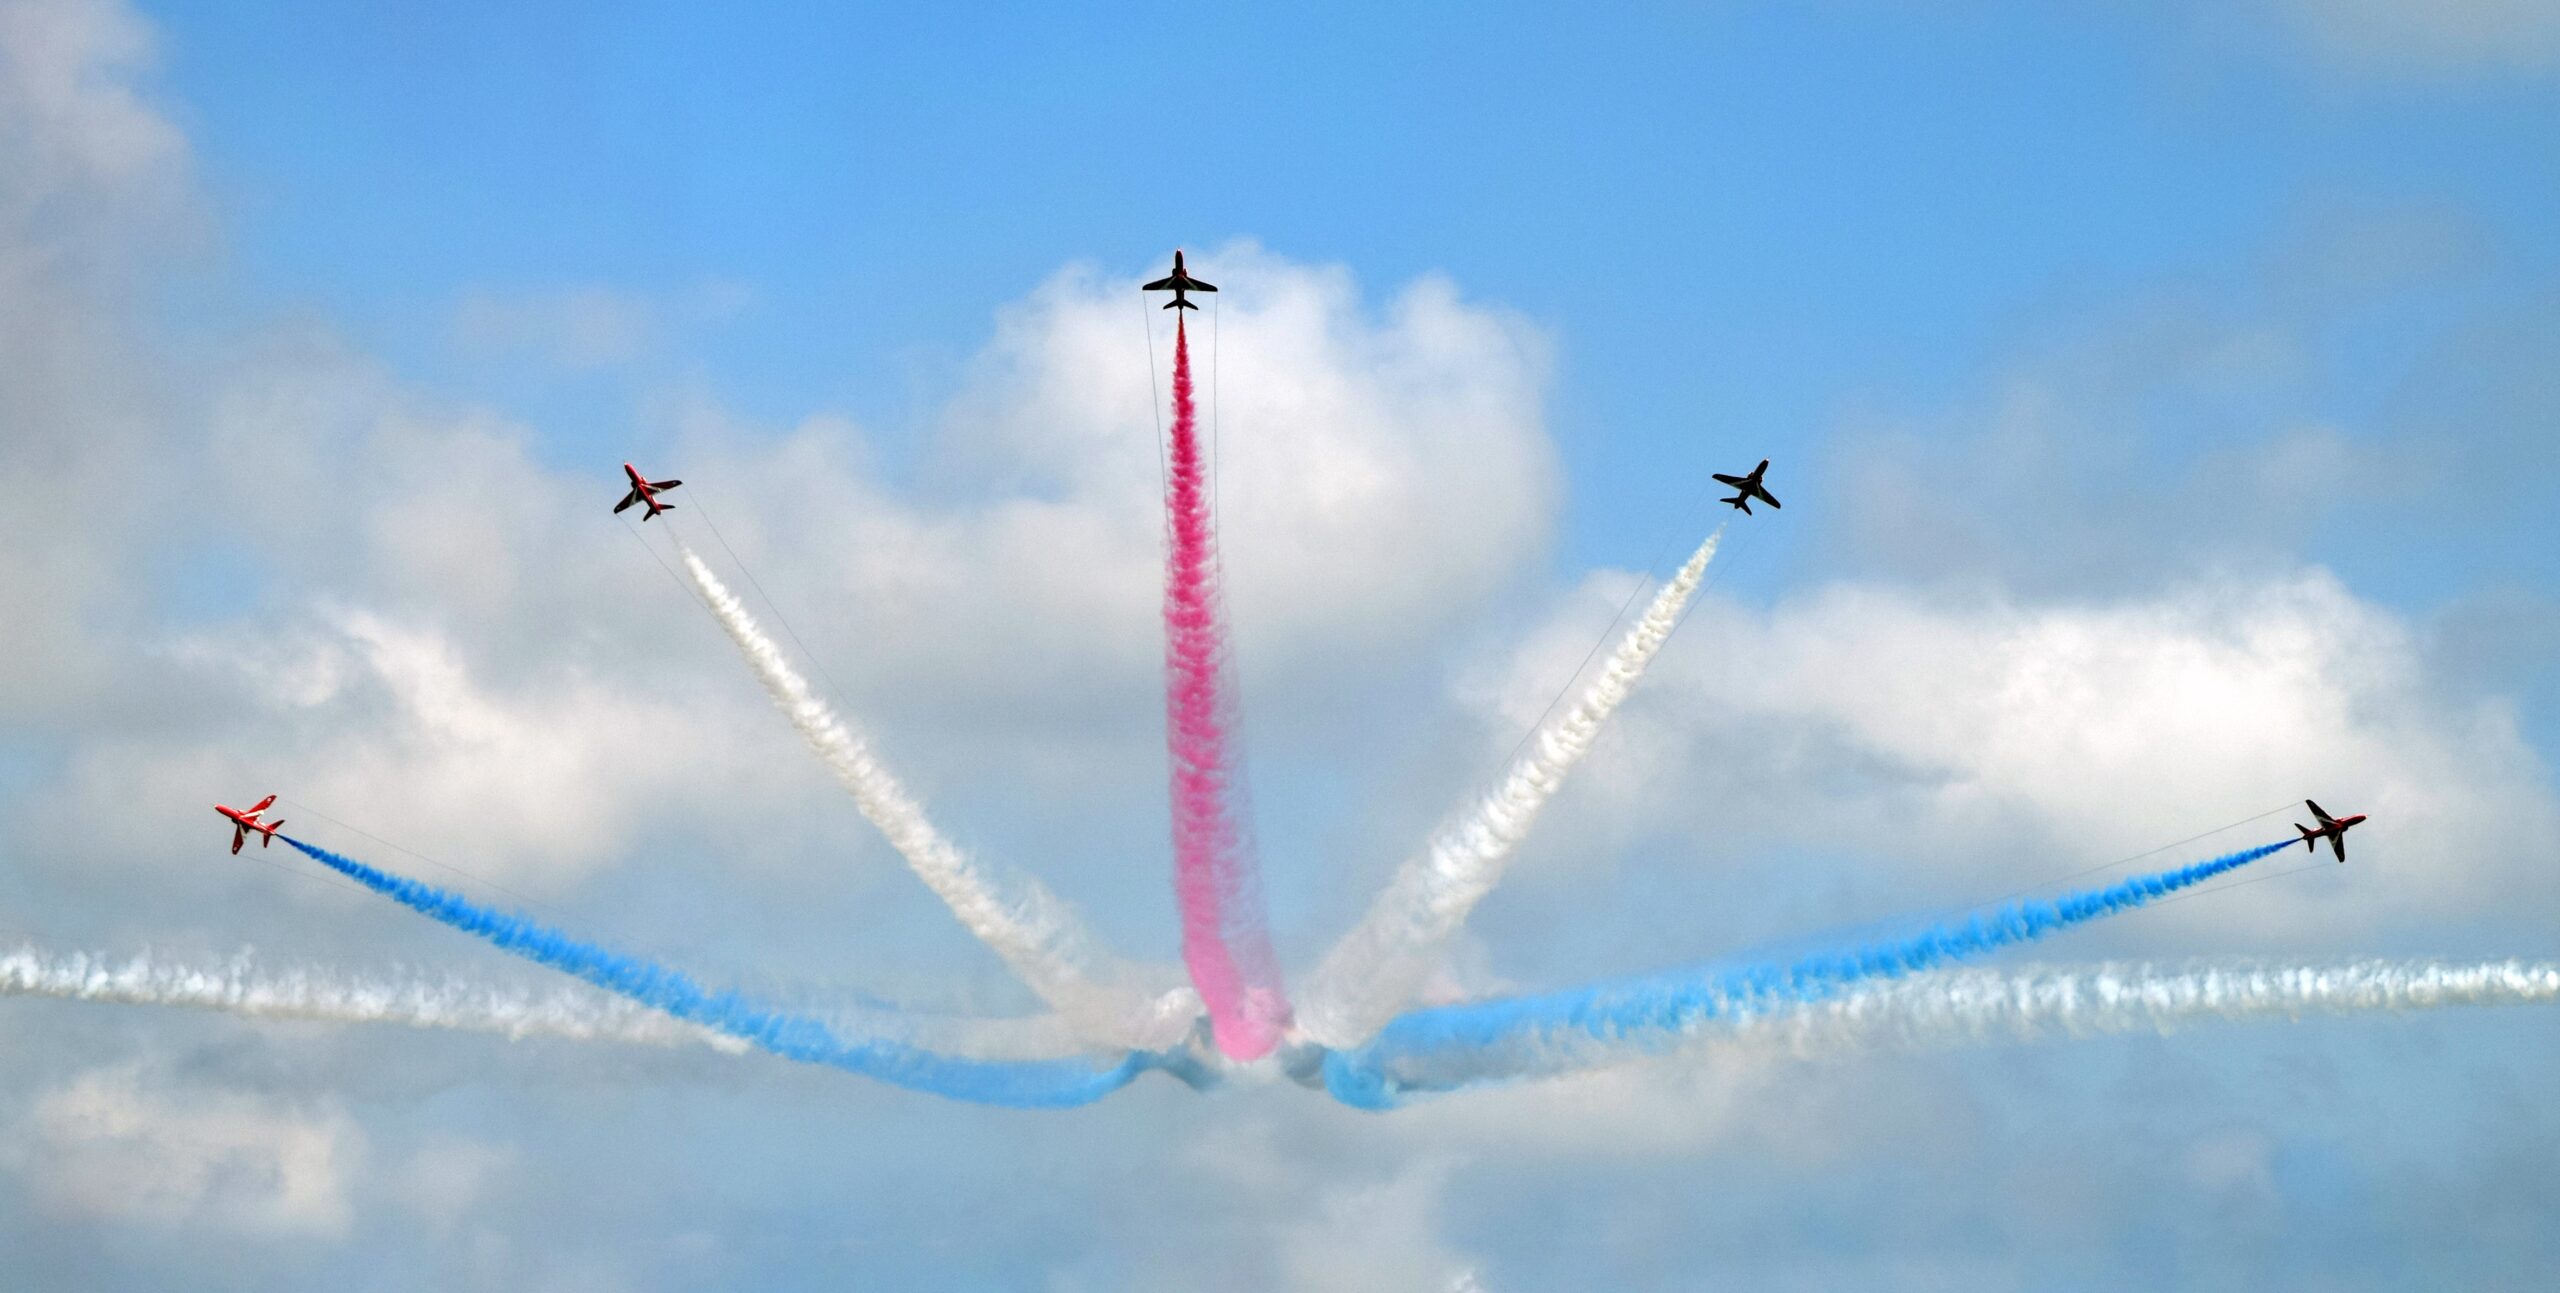 5 Red Arrow jets flying in a formation where they fan out from a singular point, trailing red, white and blue smoke behind them. This image represents the power of a strong company culture in creating synchronicity and a sense of unity. Image by Owen Kemp via Unplash: https://unsplash.com/photos/I8BaNbAd9os?utm_source=unsplash&utm_medium=referral&utm_content=creditShareLink